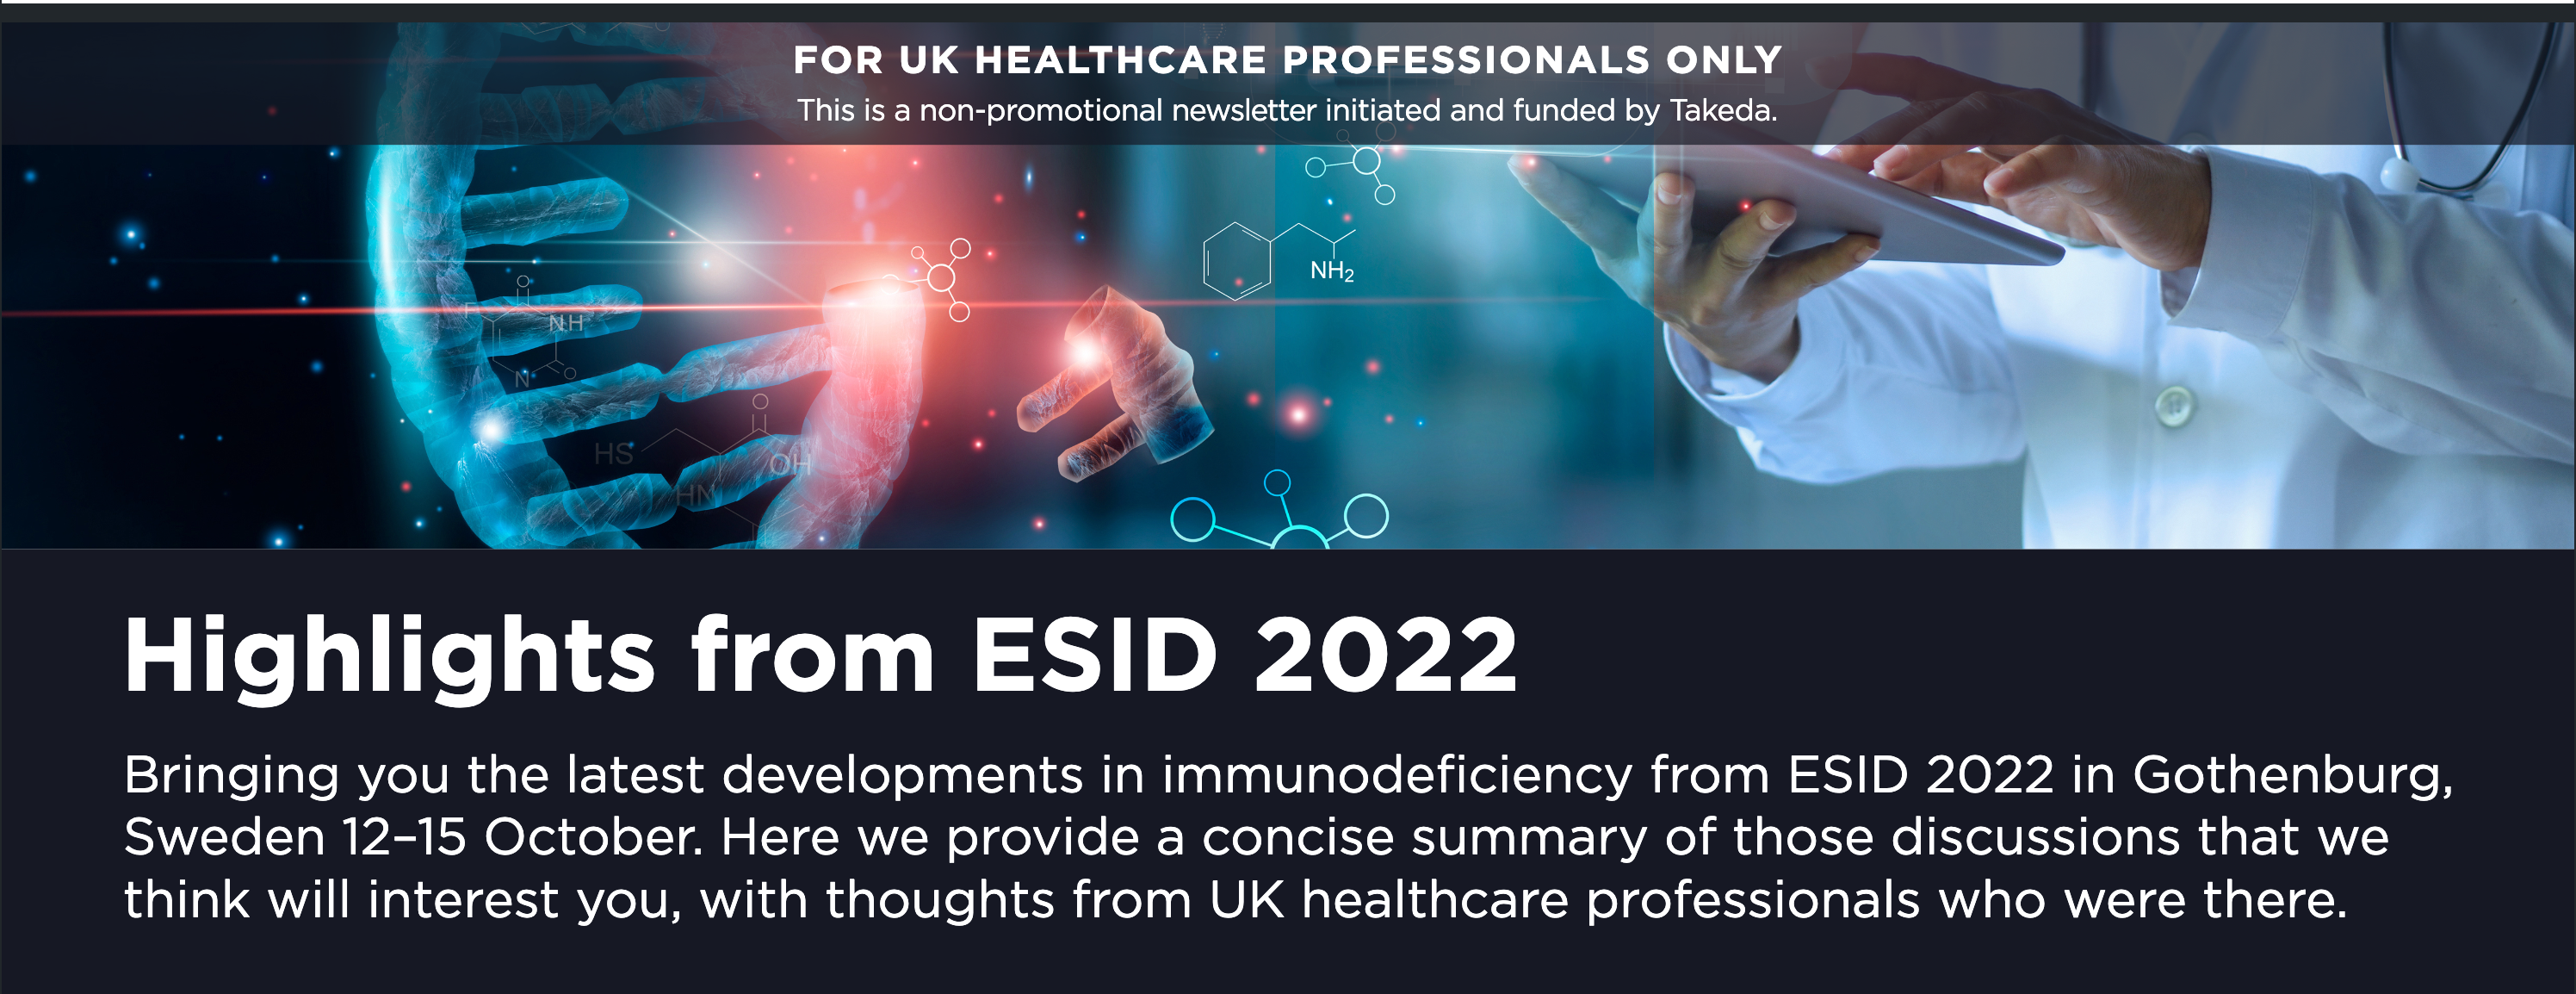 Highlights from ESID 2022